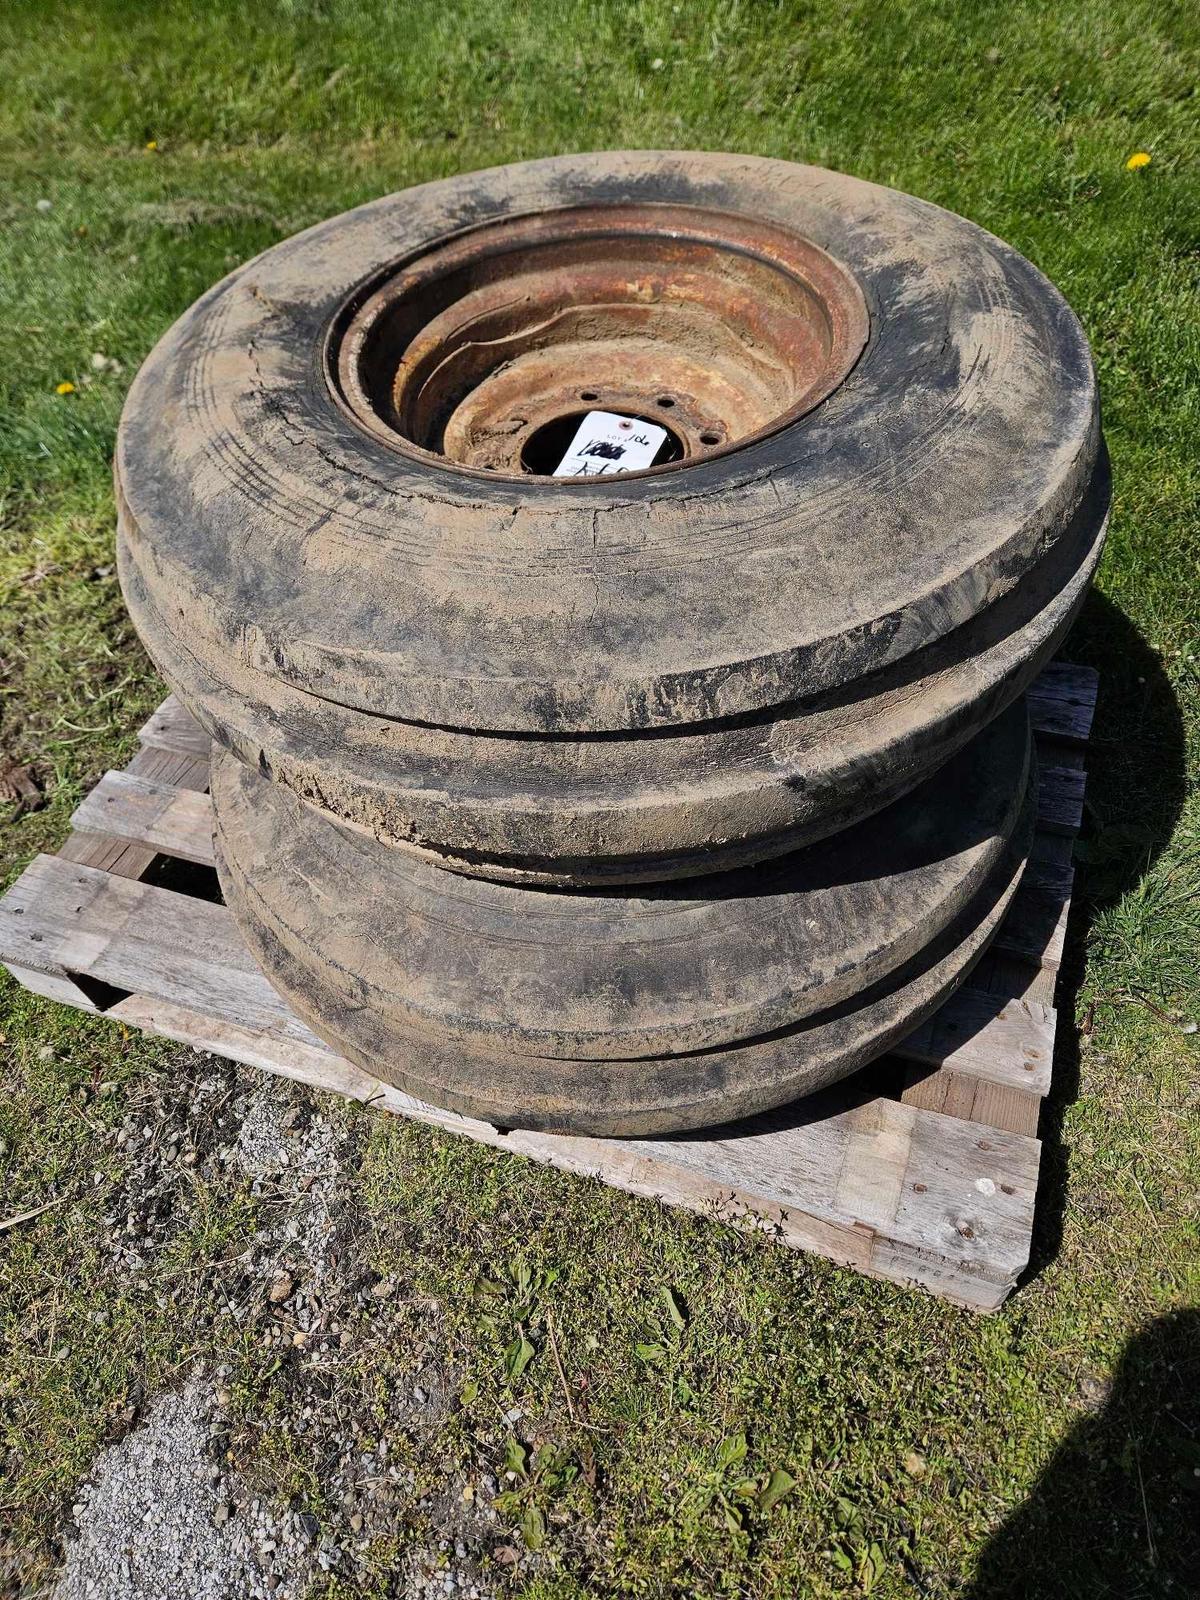 Pair of 10.00-16 tractor tires